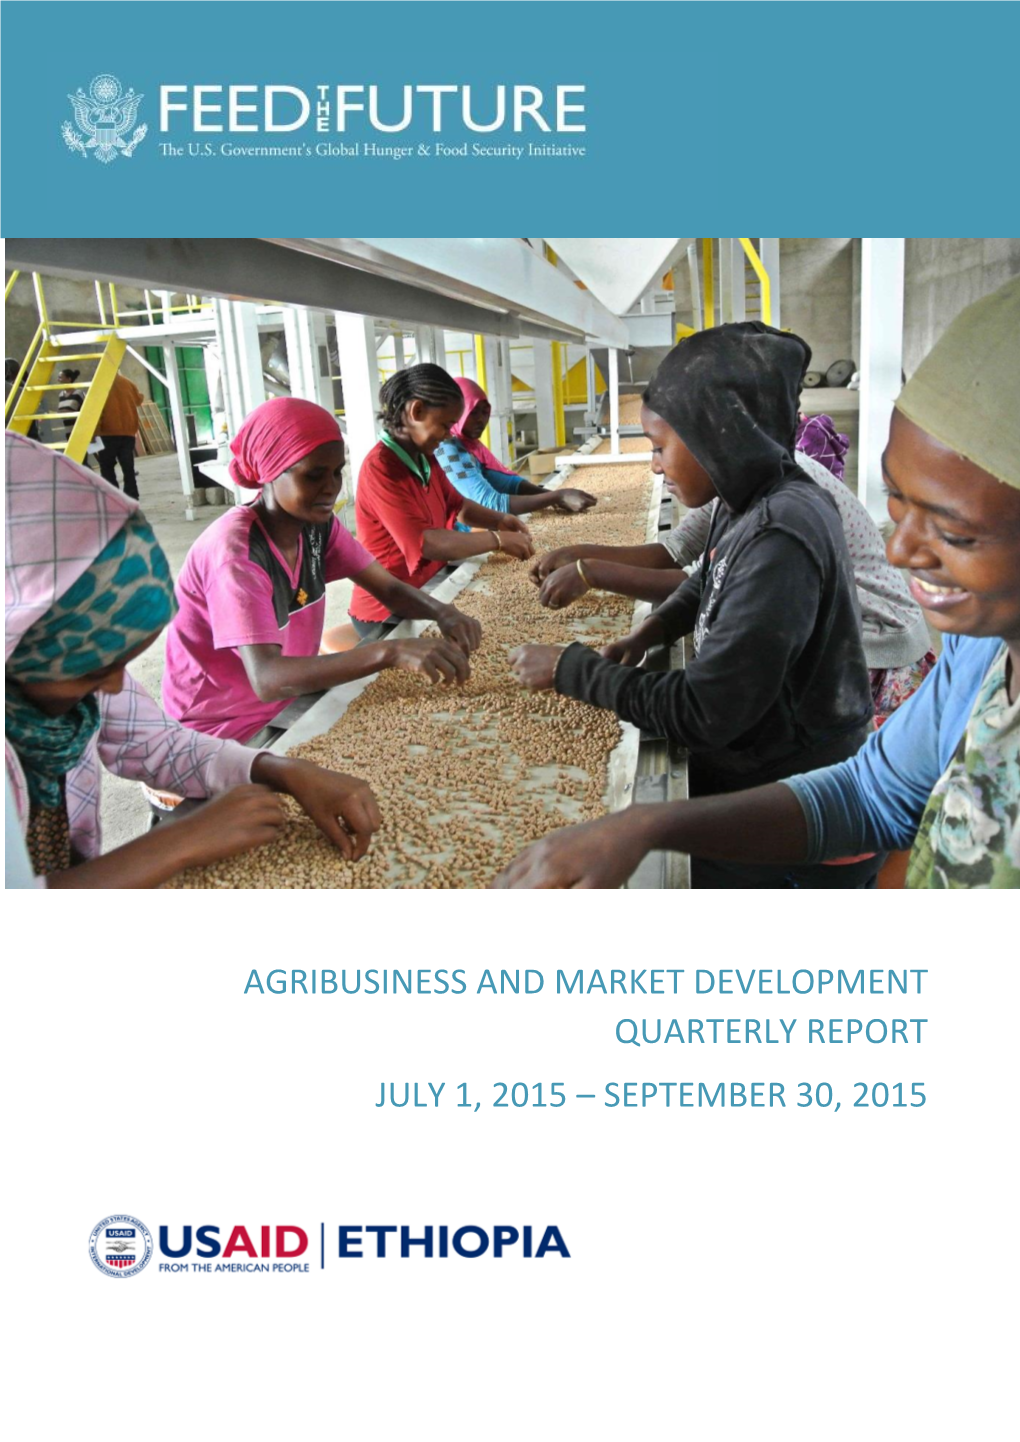 Agribusiness and Market Development Quarterly Report July 1, 2015